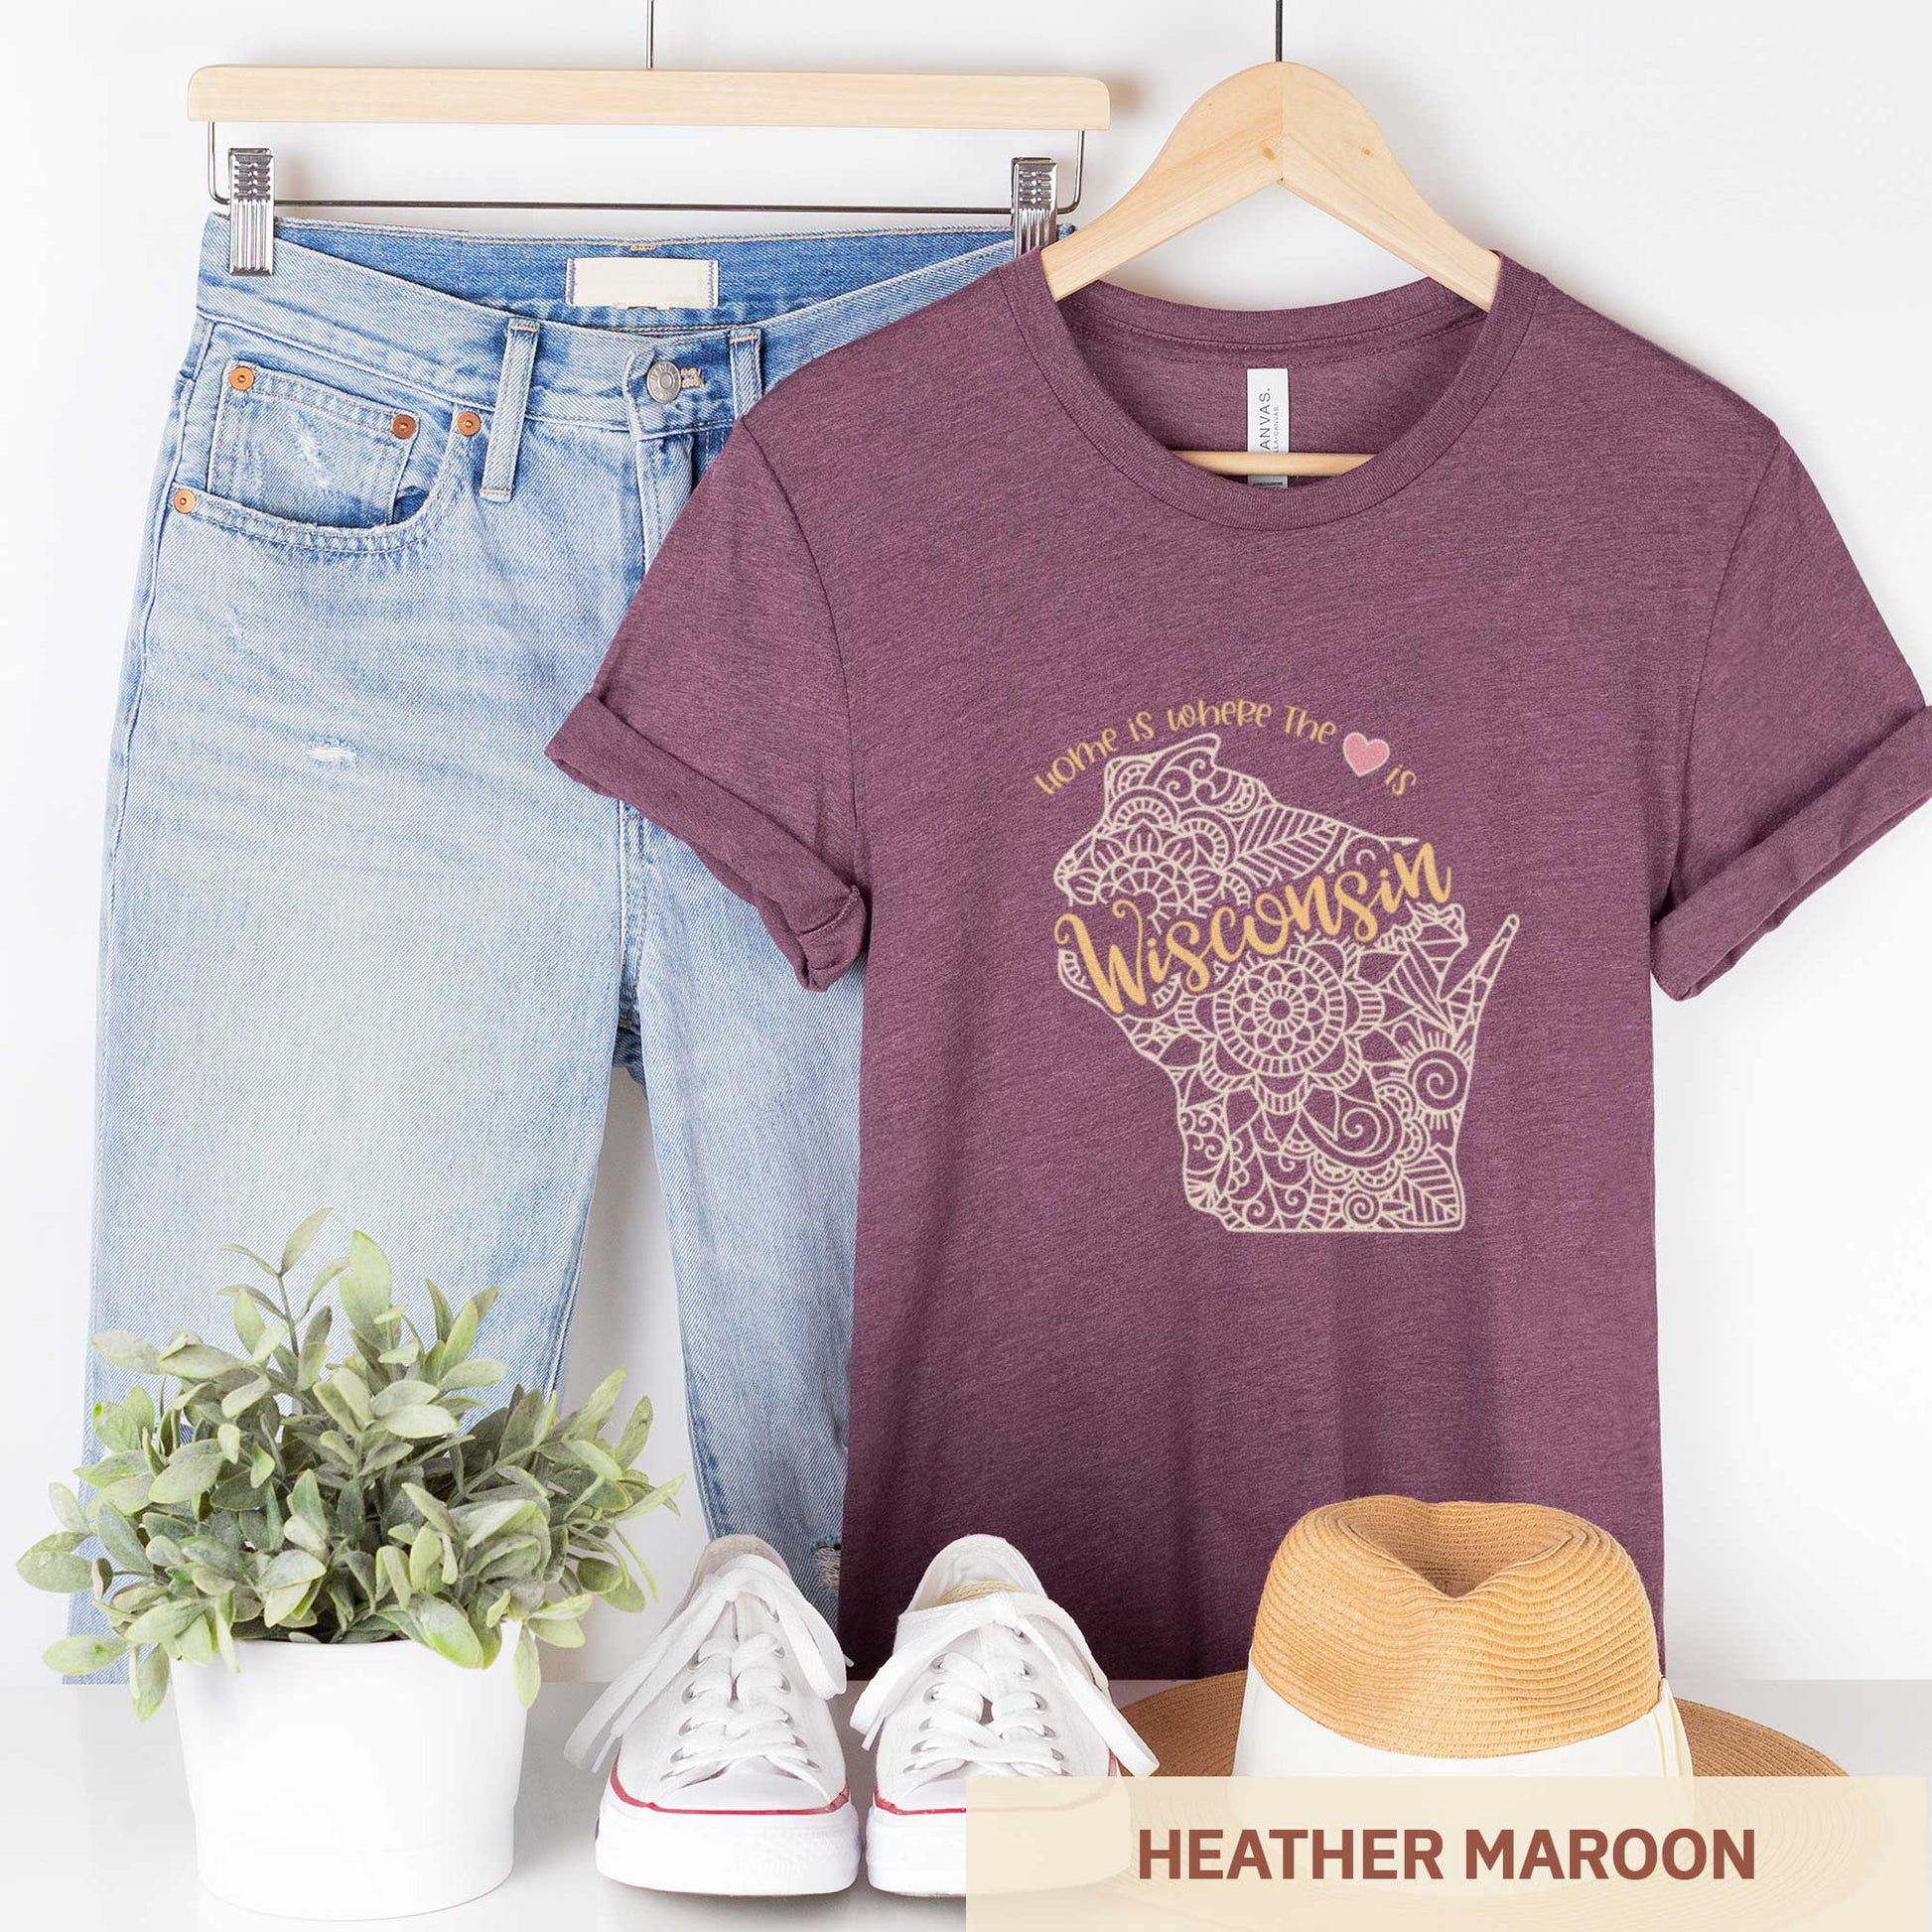 A hanging heather maroon Bella Canvas t-shirt featuring a mandala in the shape of Wisconsin with the words home is where the heart is.